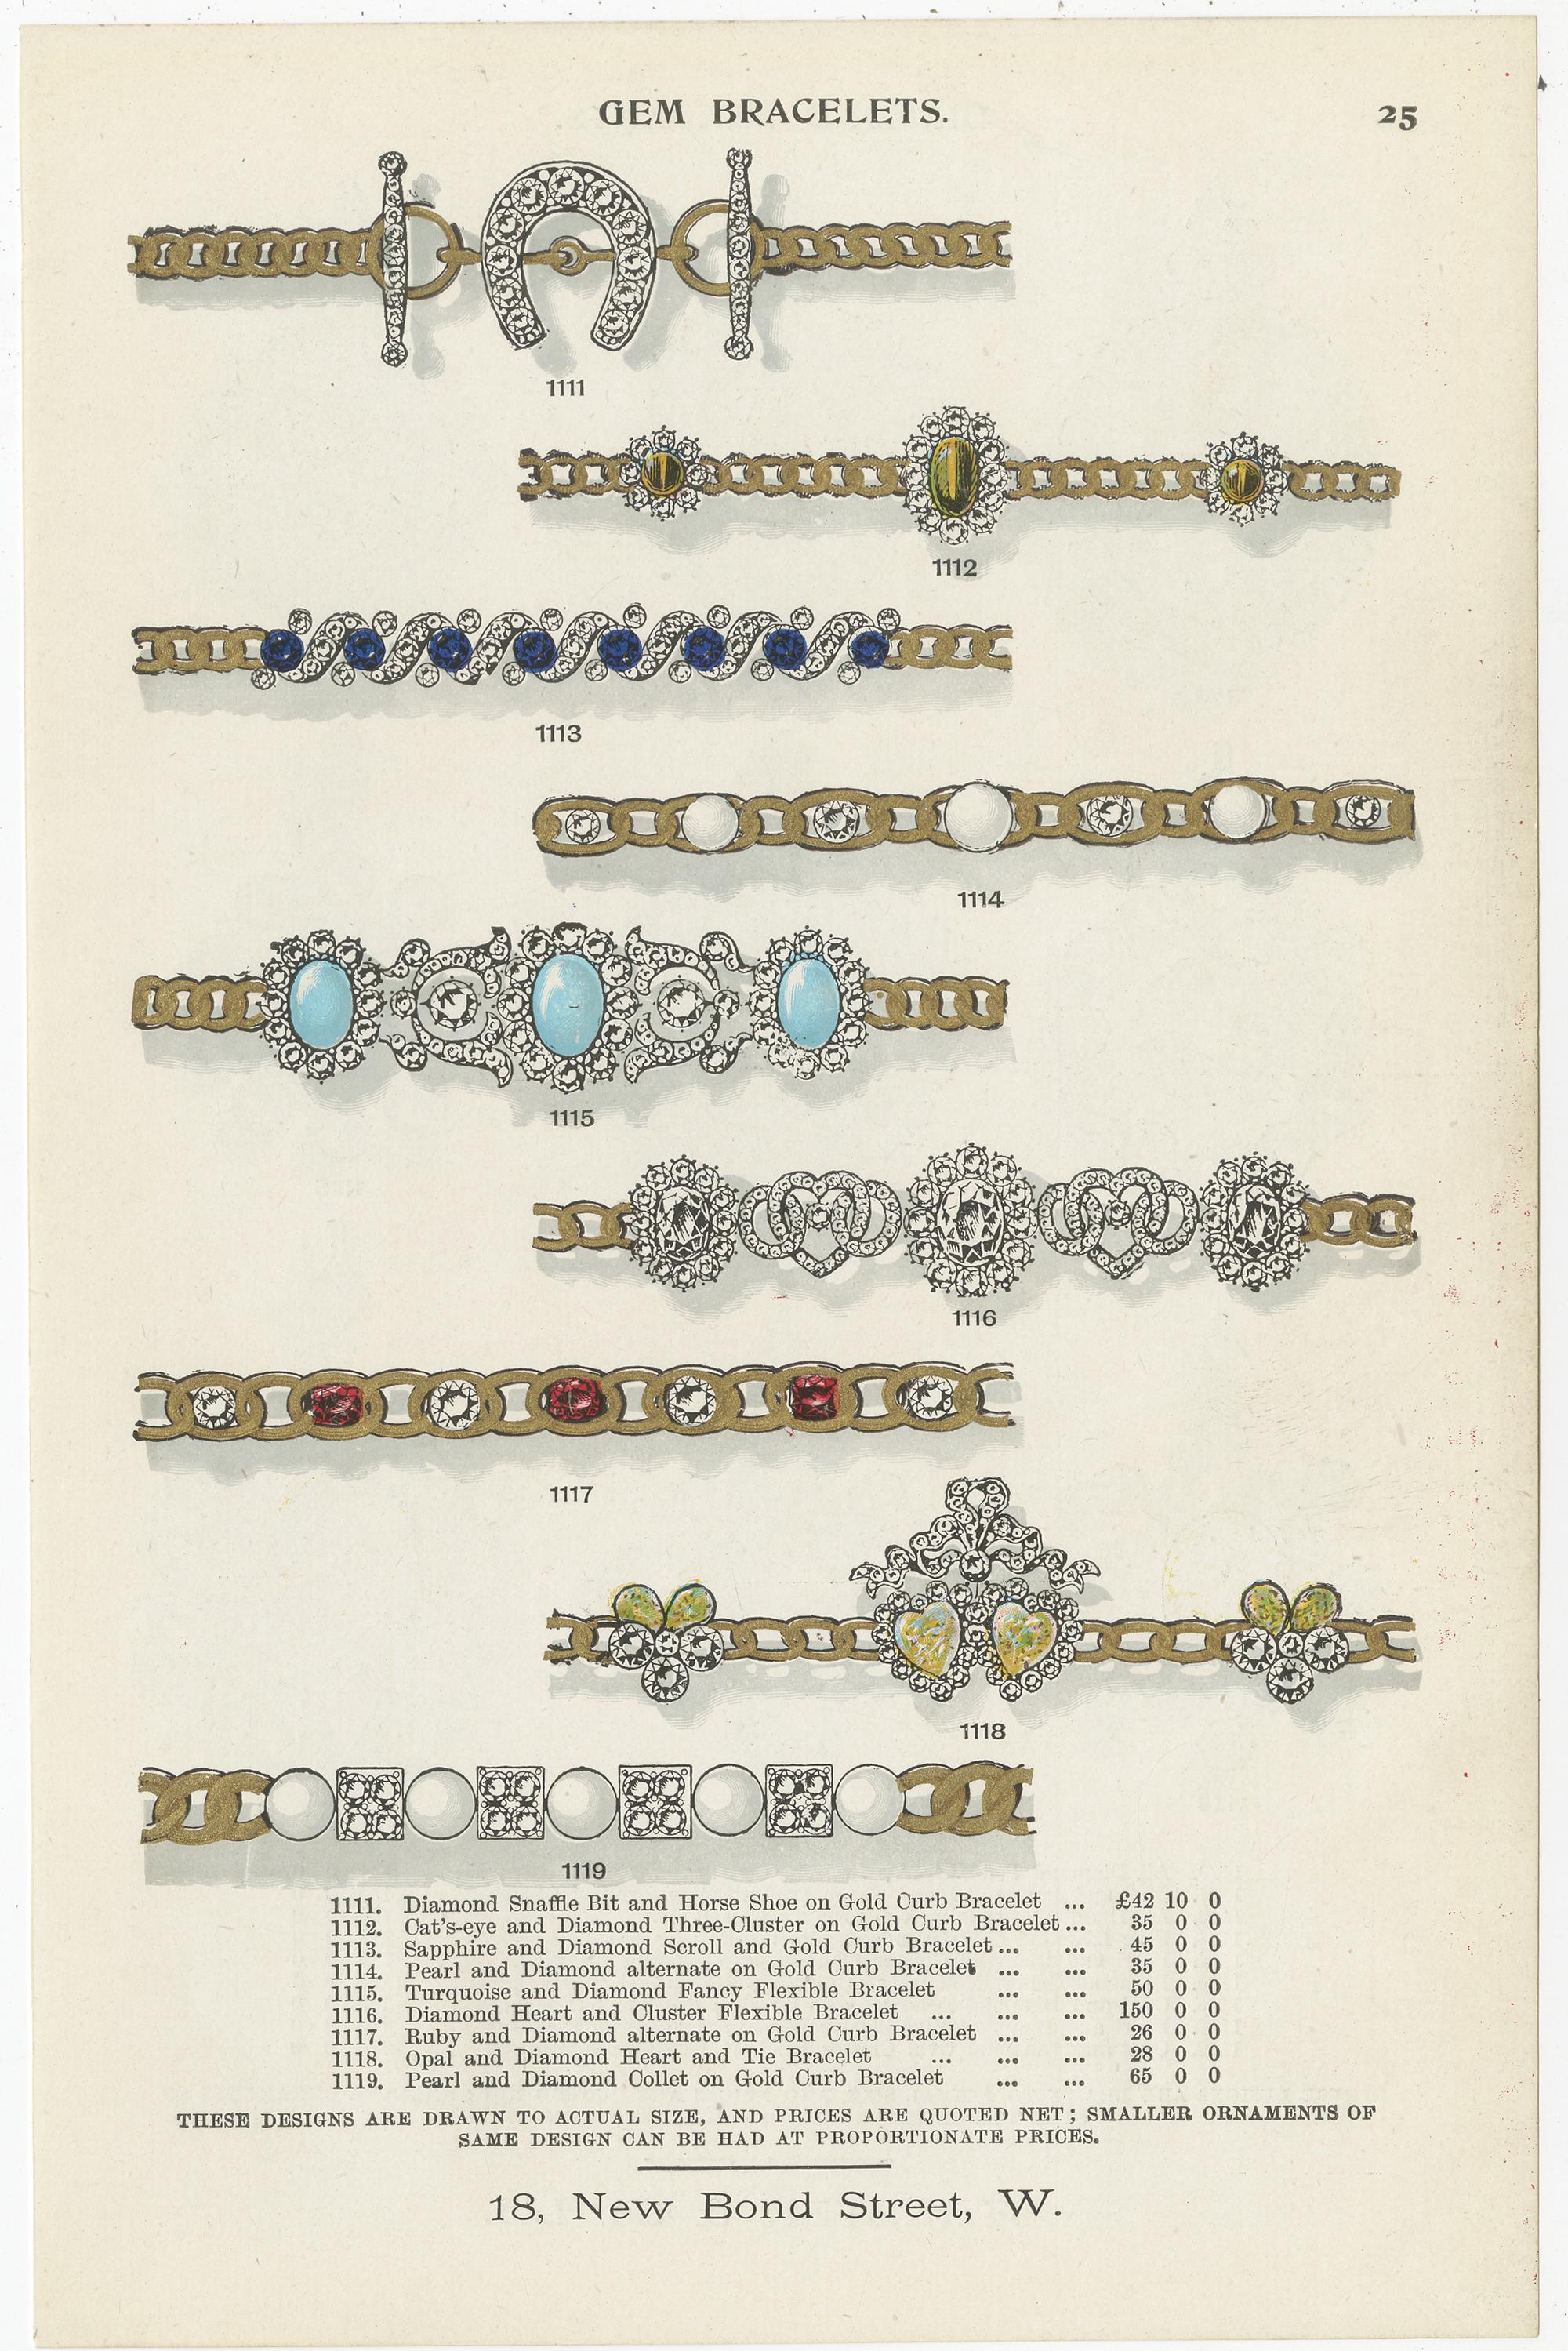 Set of two antique prints titled 'Gem Bracelets'. Two original chromolithographic plates of gem bracelets. These prints originate from 'Gems', a catalog containing fascinating essays on 31 individual gem stones, as well as on heraldry, and the